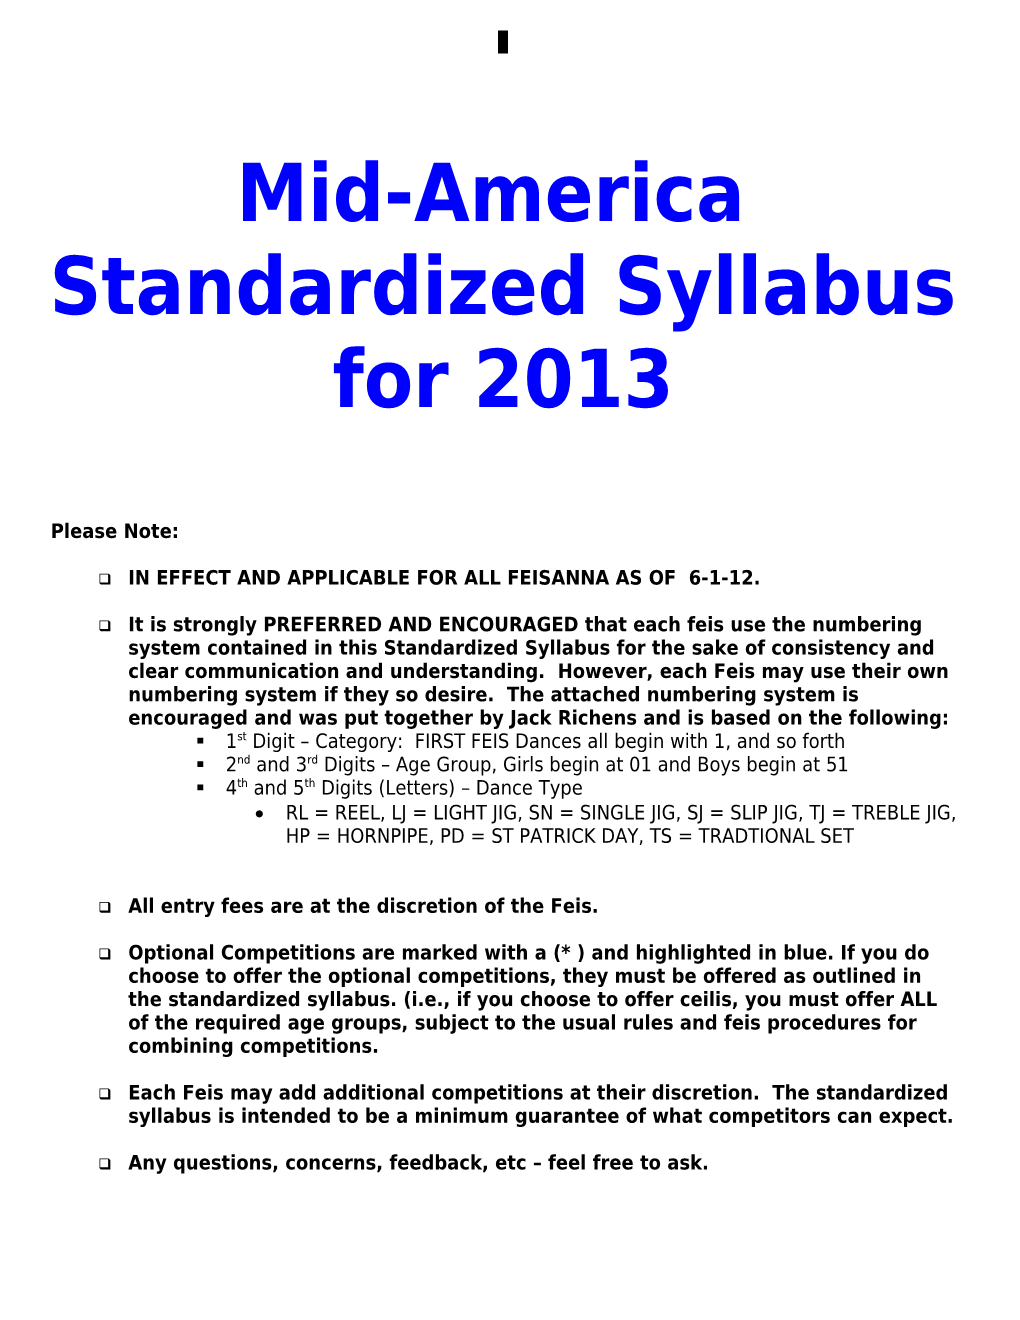 Standard North American Syllabus Issues and Recommendations s1